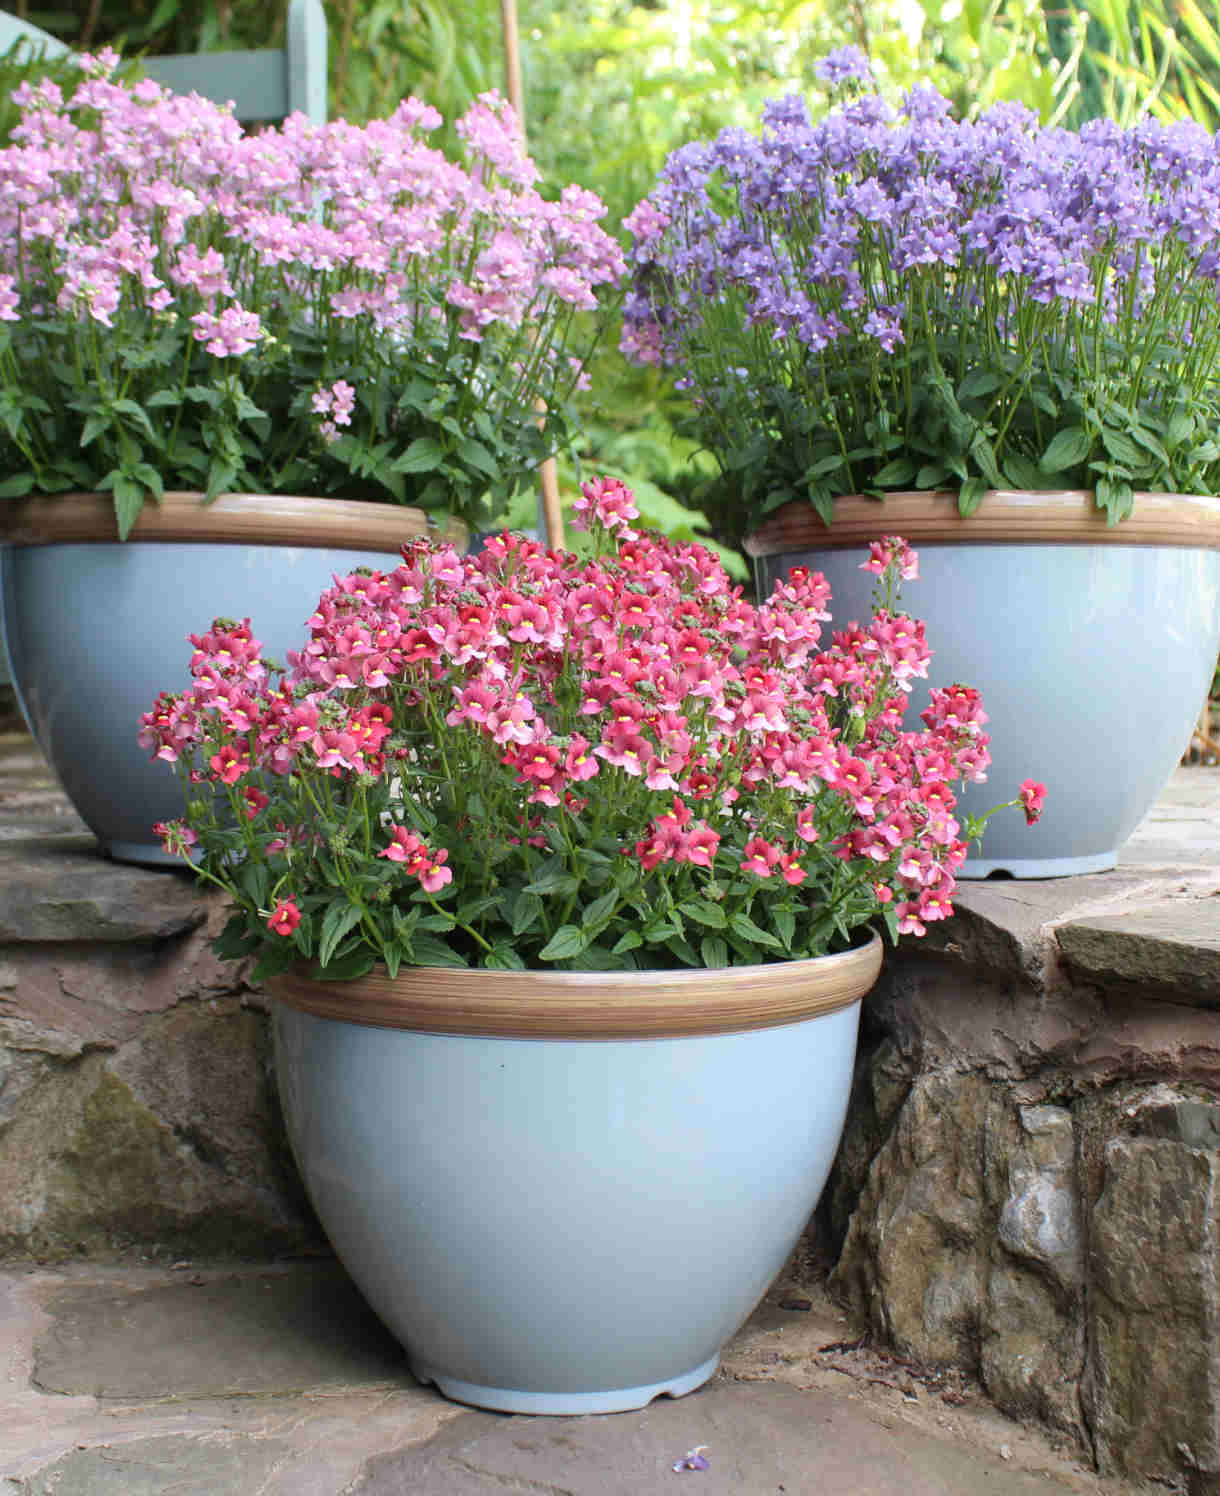 Nemesia_Melody_Pink_Lilac_Blue_and_Raspberry_in_blue_pots_Georgie_inhouse_image